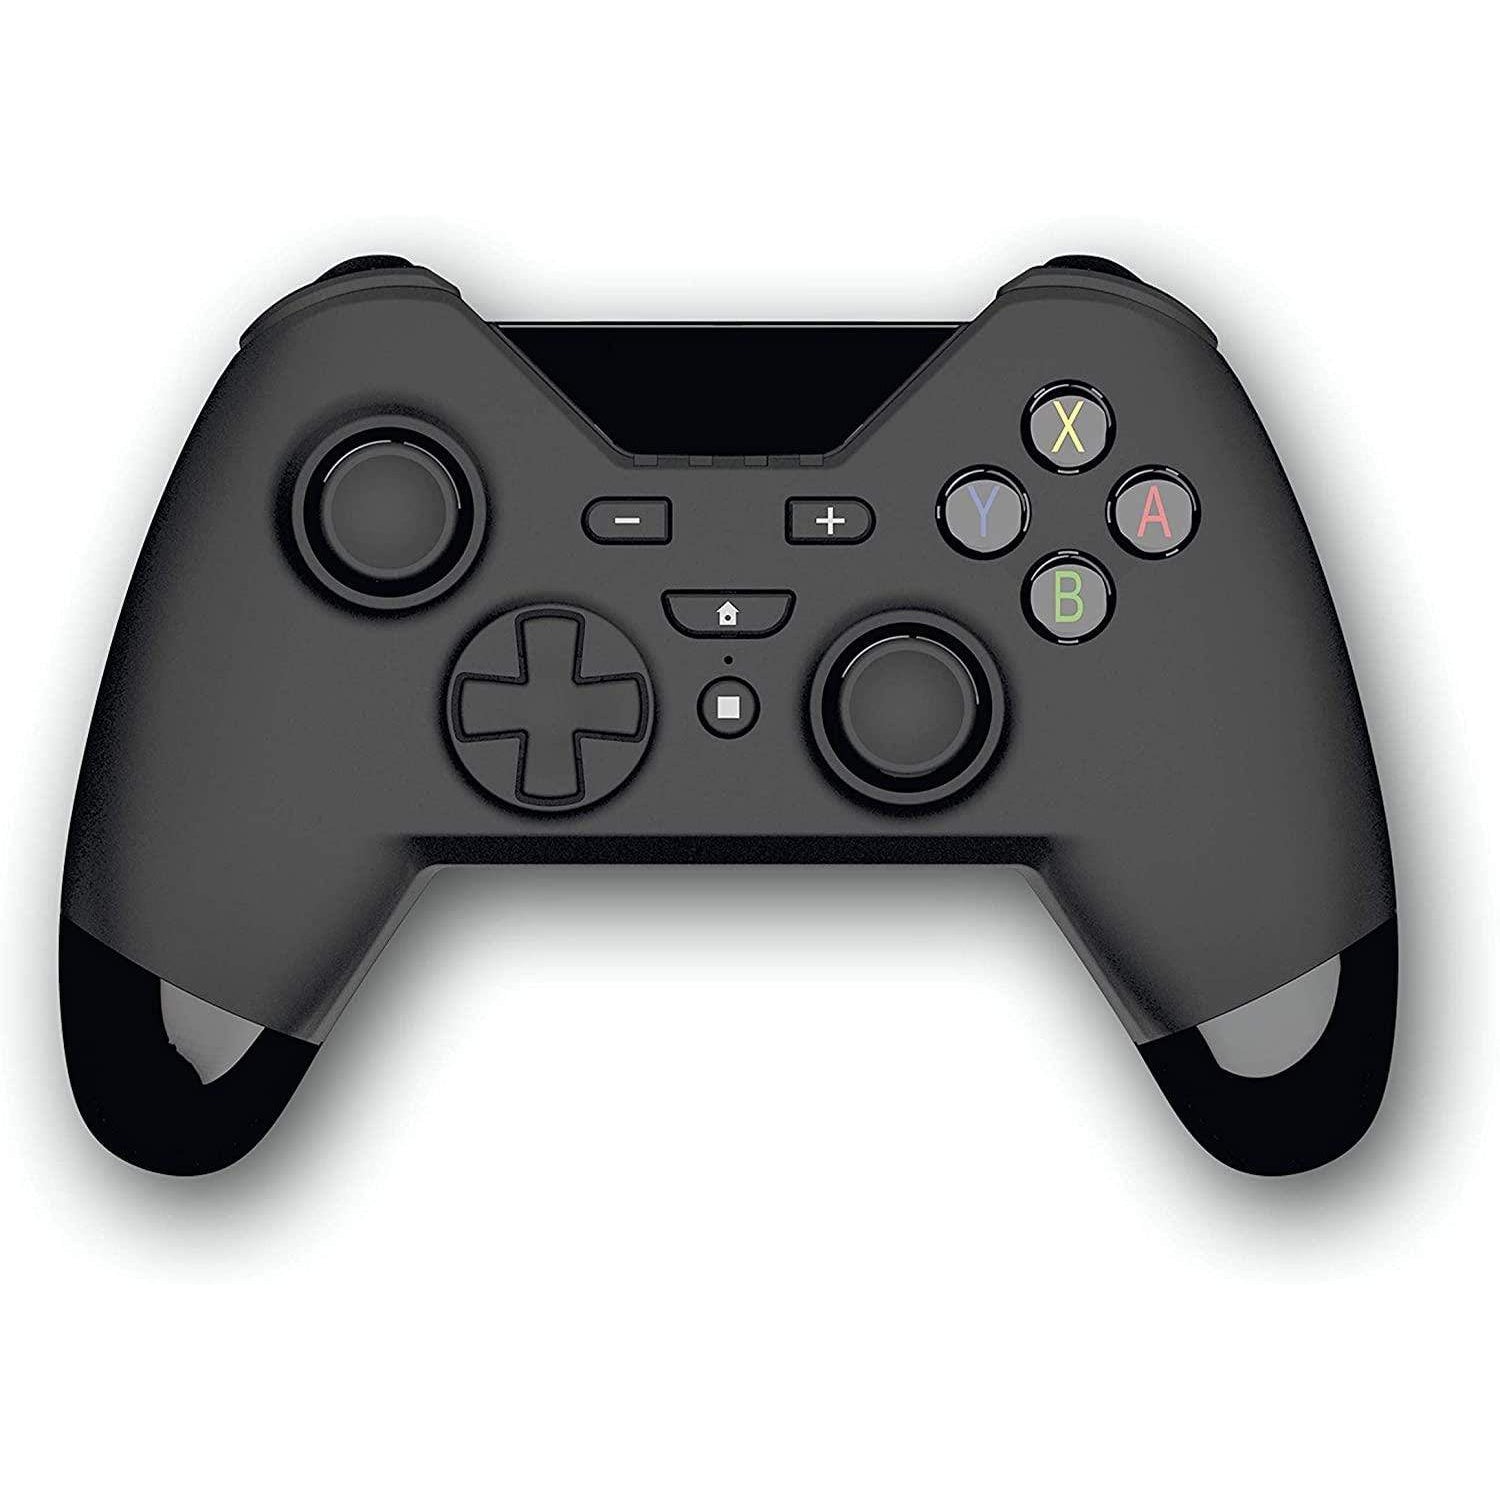 Gioteck WX-4 Premium Wired Switch Controller - Black - New